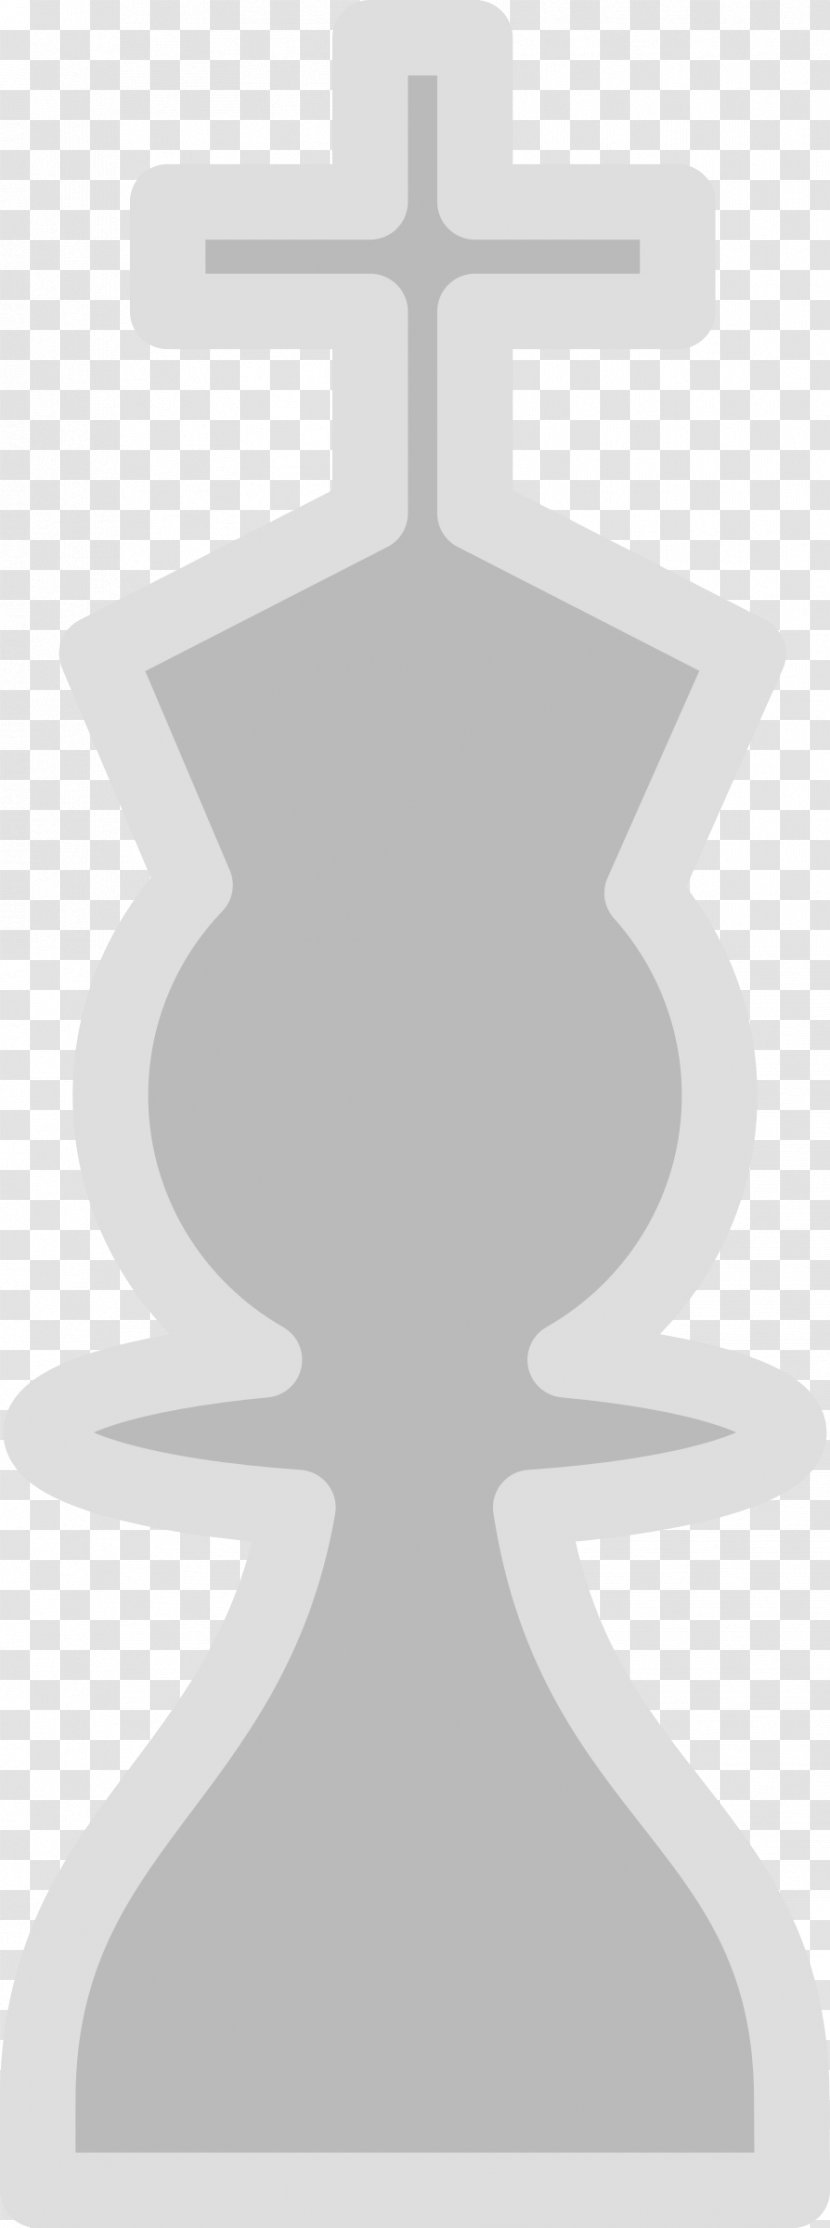 Chess Piece Board Game Clip Art - Symbol Transparent PNG